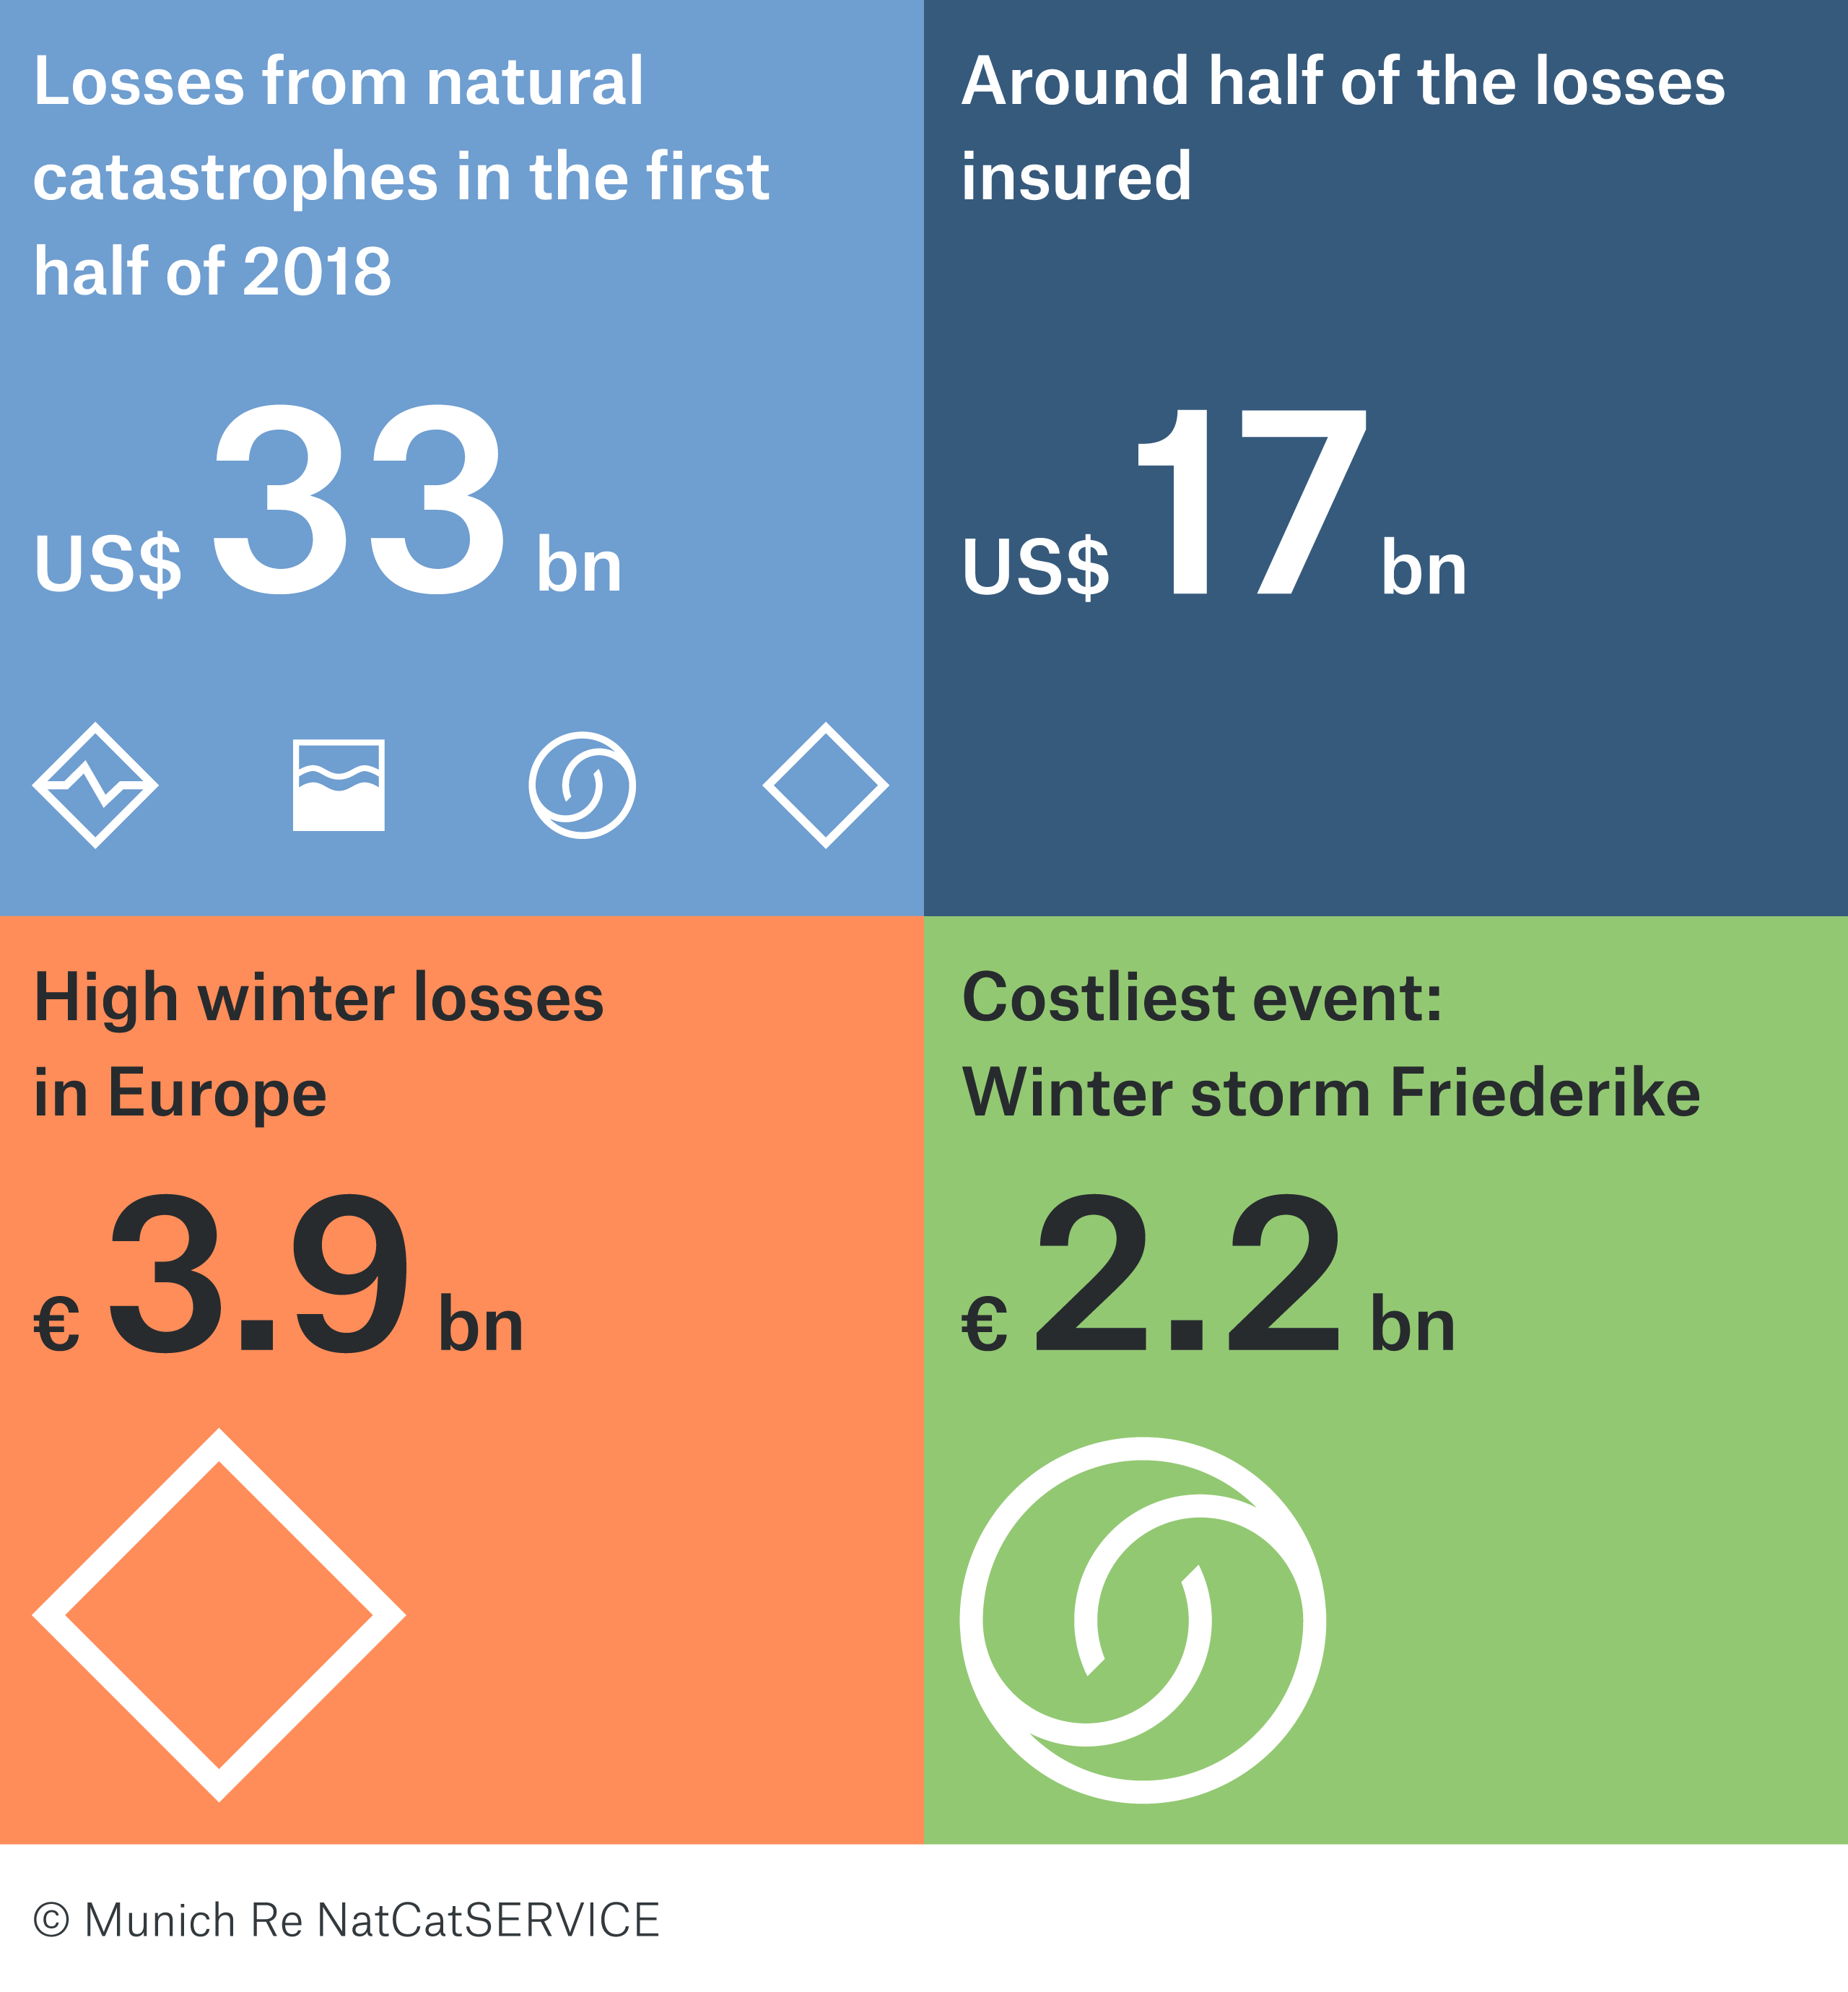 The first half of 2018 was fortunate in that natural disasters across the world caused significantly lower losses than usual. According to provisional figures, overall losses were around US$ 33bn, the lowest level since 2005